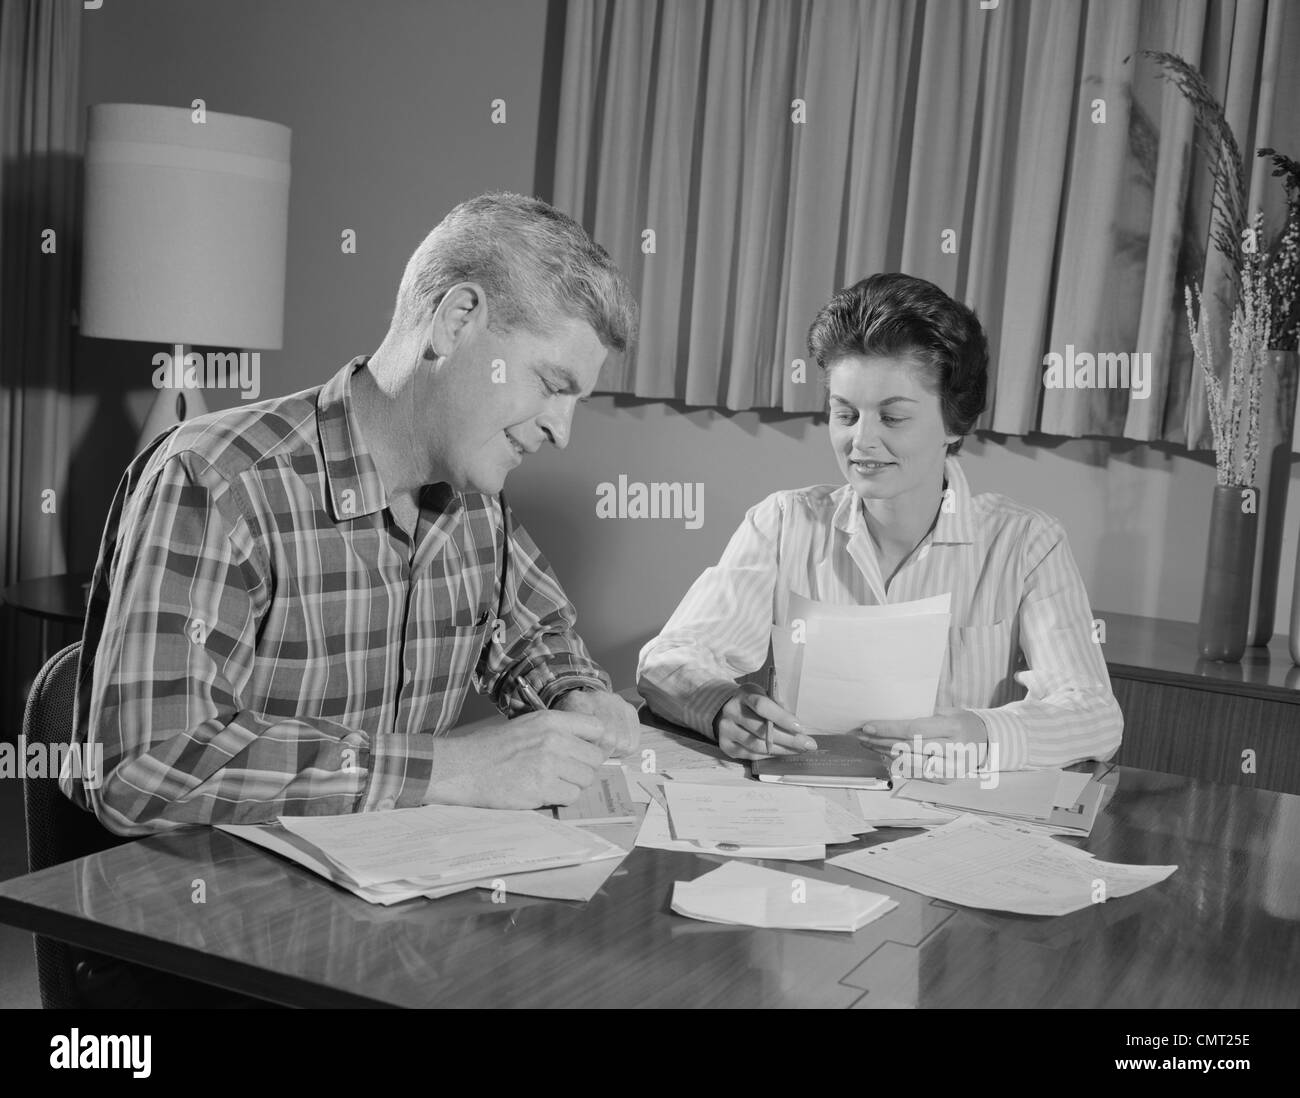 1960s COUPLE MAN WOMAN AT TABLE WORKING ON HOUSEHOLD ACCOUNTS BILLS Stock Photo